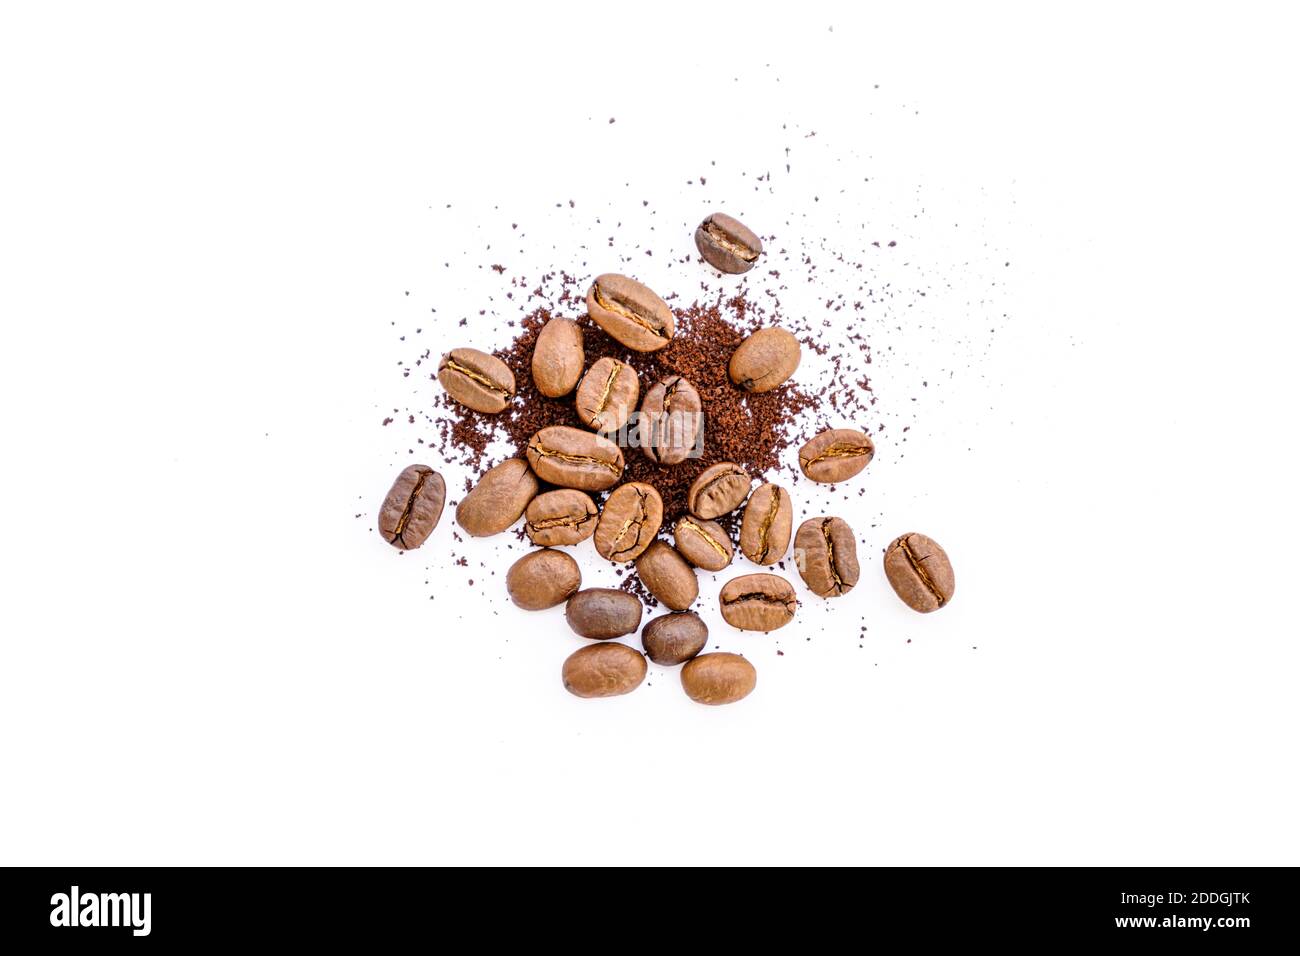 Roasted coffee beans with ground coffee on white background Stock Photo